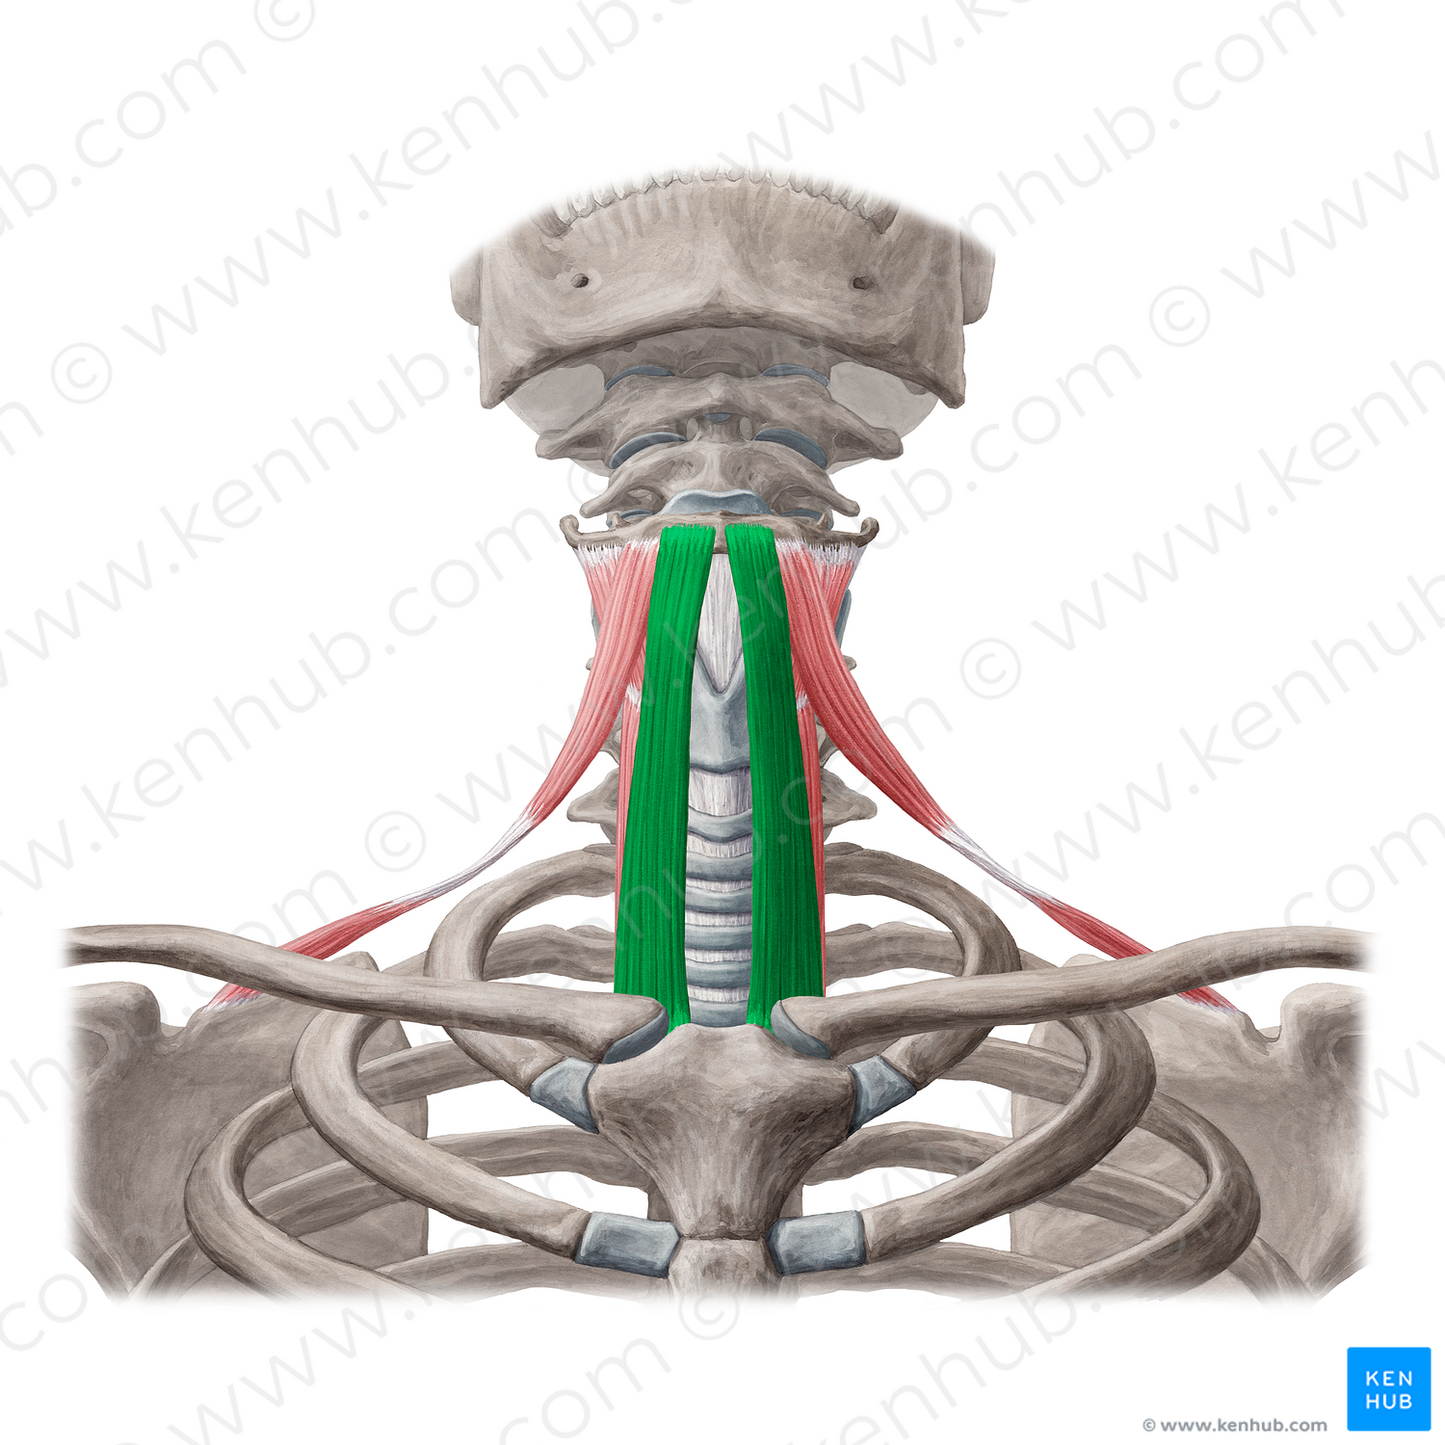 Sternohyoid muscle (#6017)